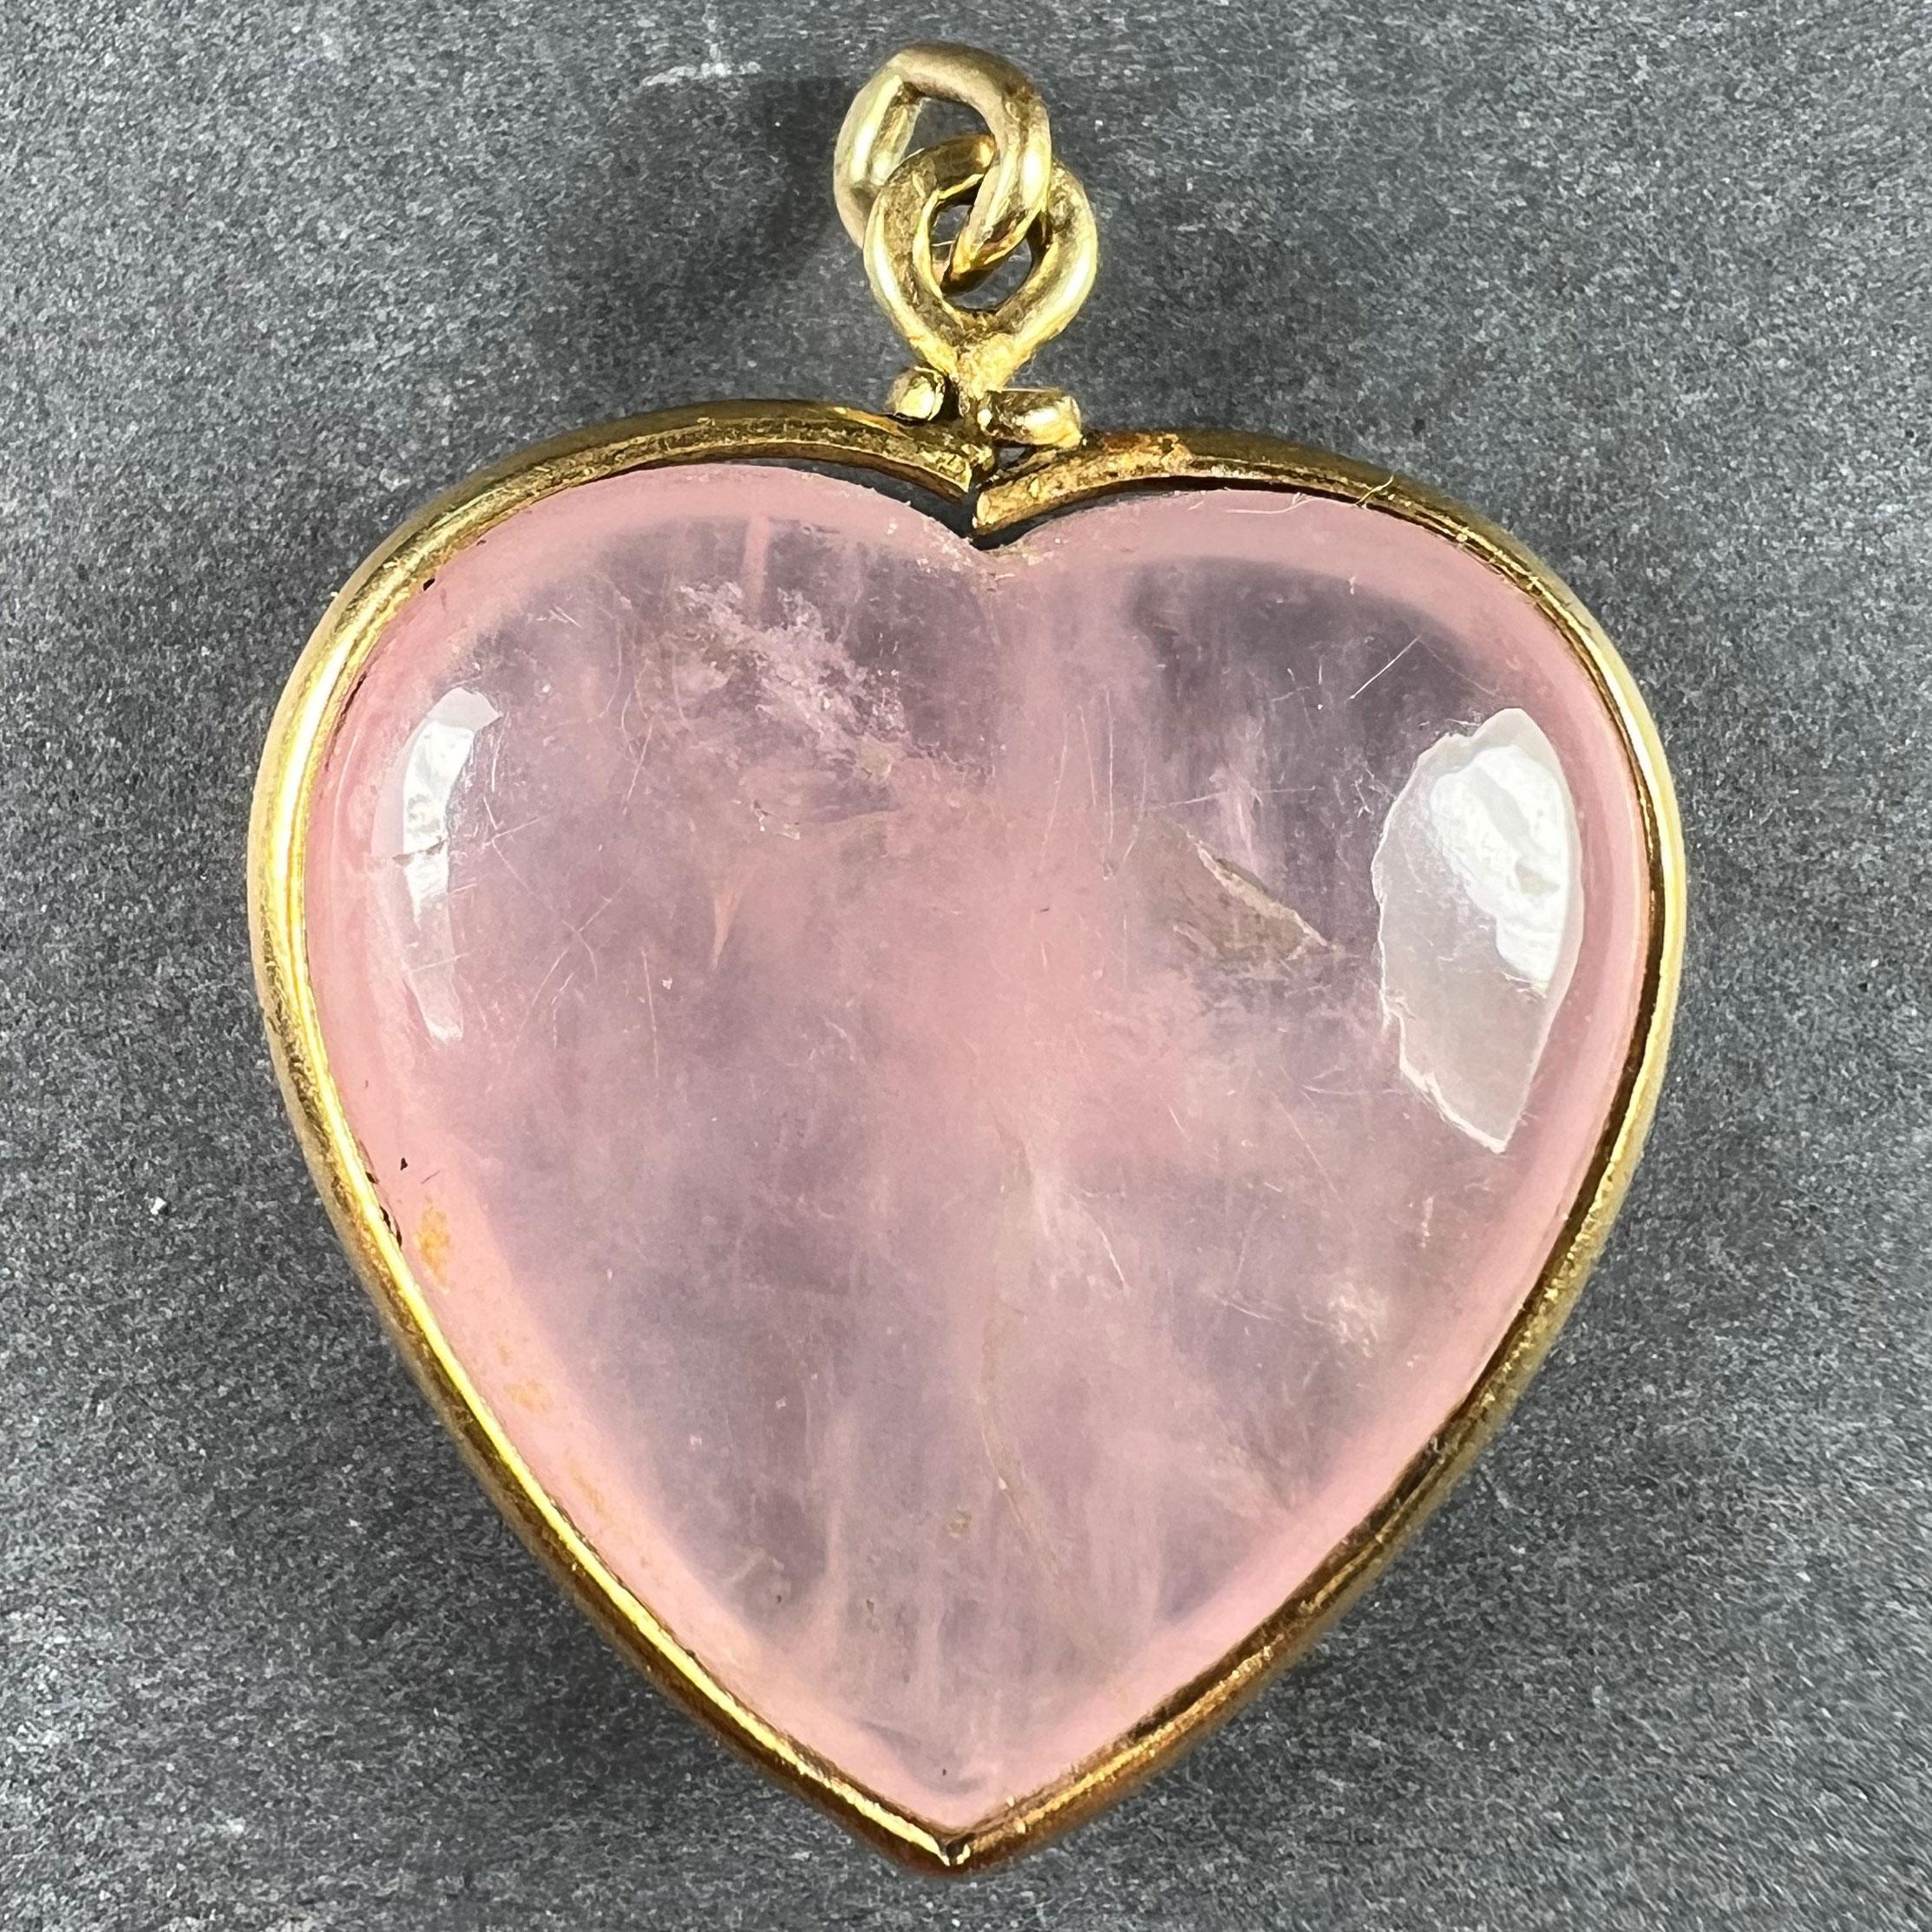 A French 18 karat (18K) yellow gold pendant designed as a heart set with a pink rose quartz heart weighing approximately 34 carats. Stamped with the eagle's head for 18 karat gold and French manufacture and a partial maker's mark. These marks are